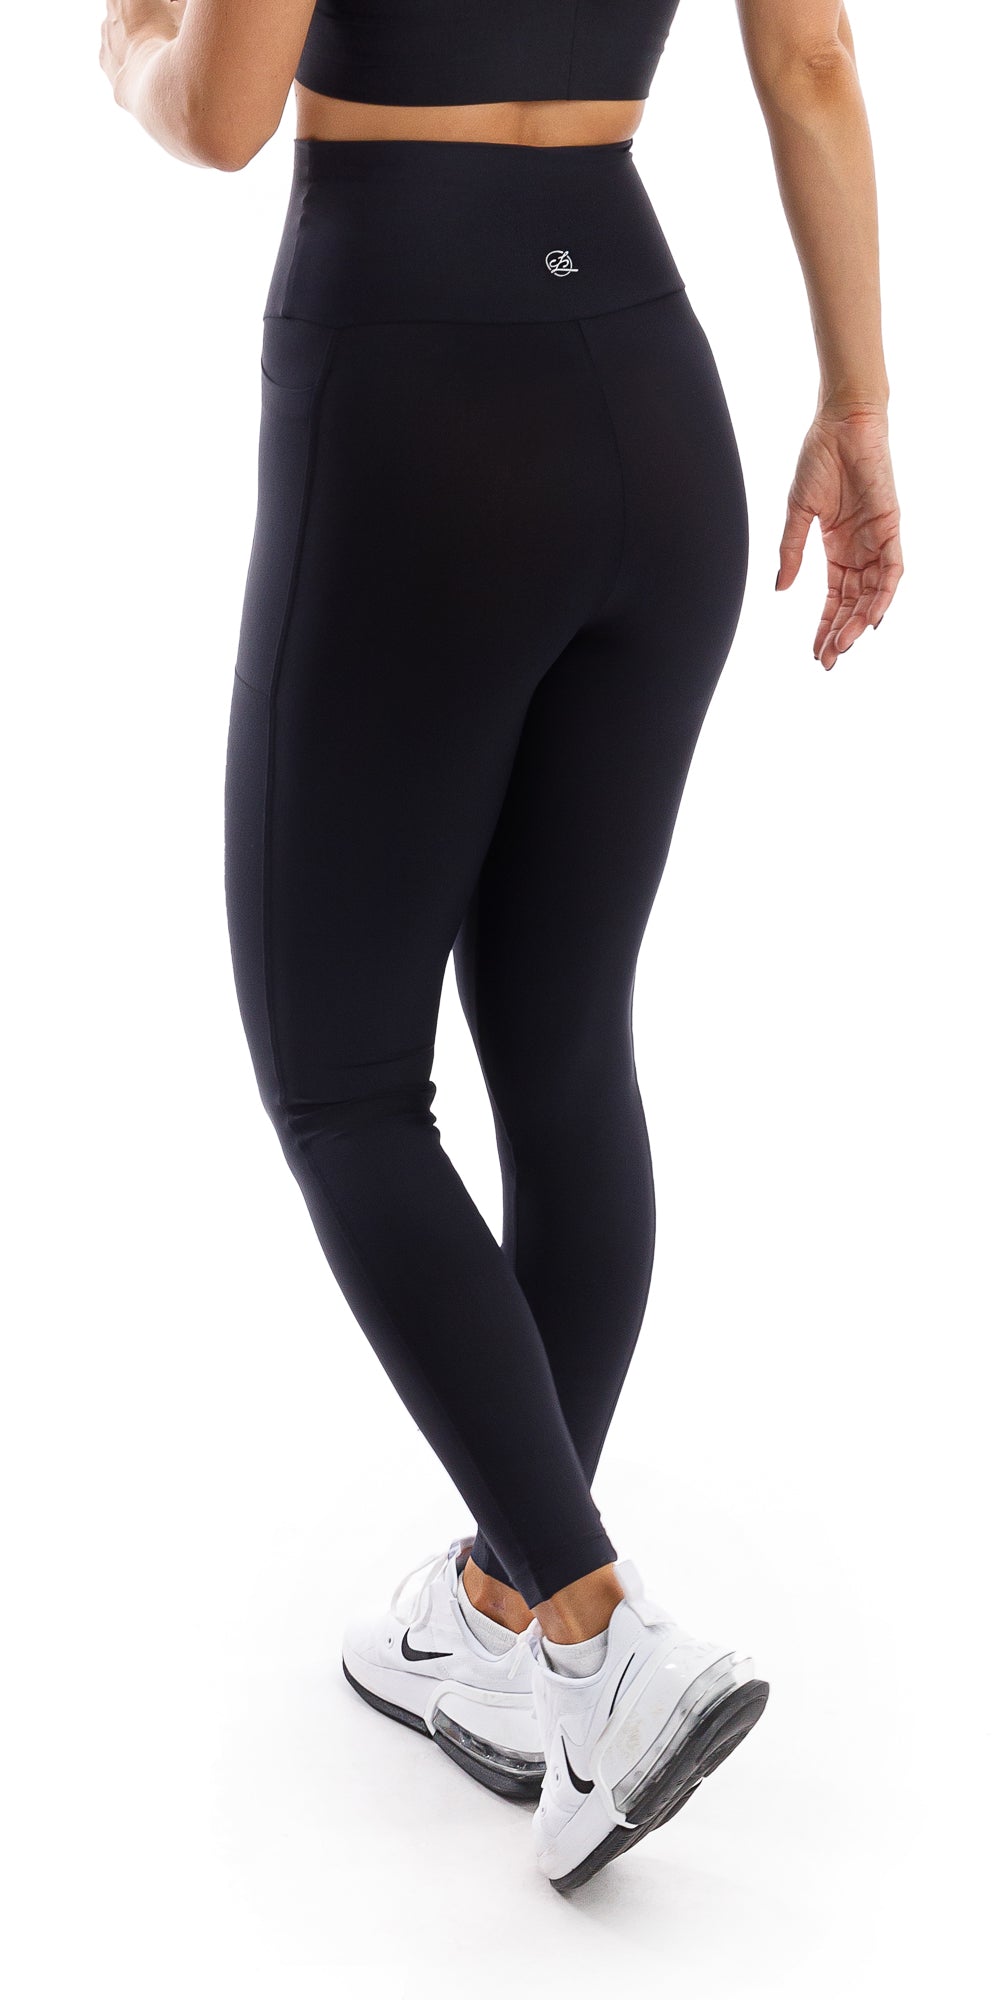 Angled side view of girl wearing black Midnight Eco Ultra High Waist Leggings with Pockets walking